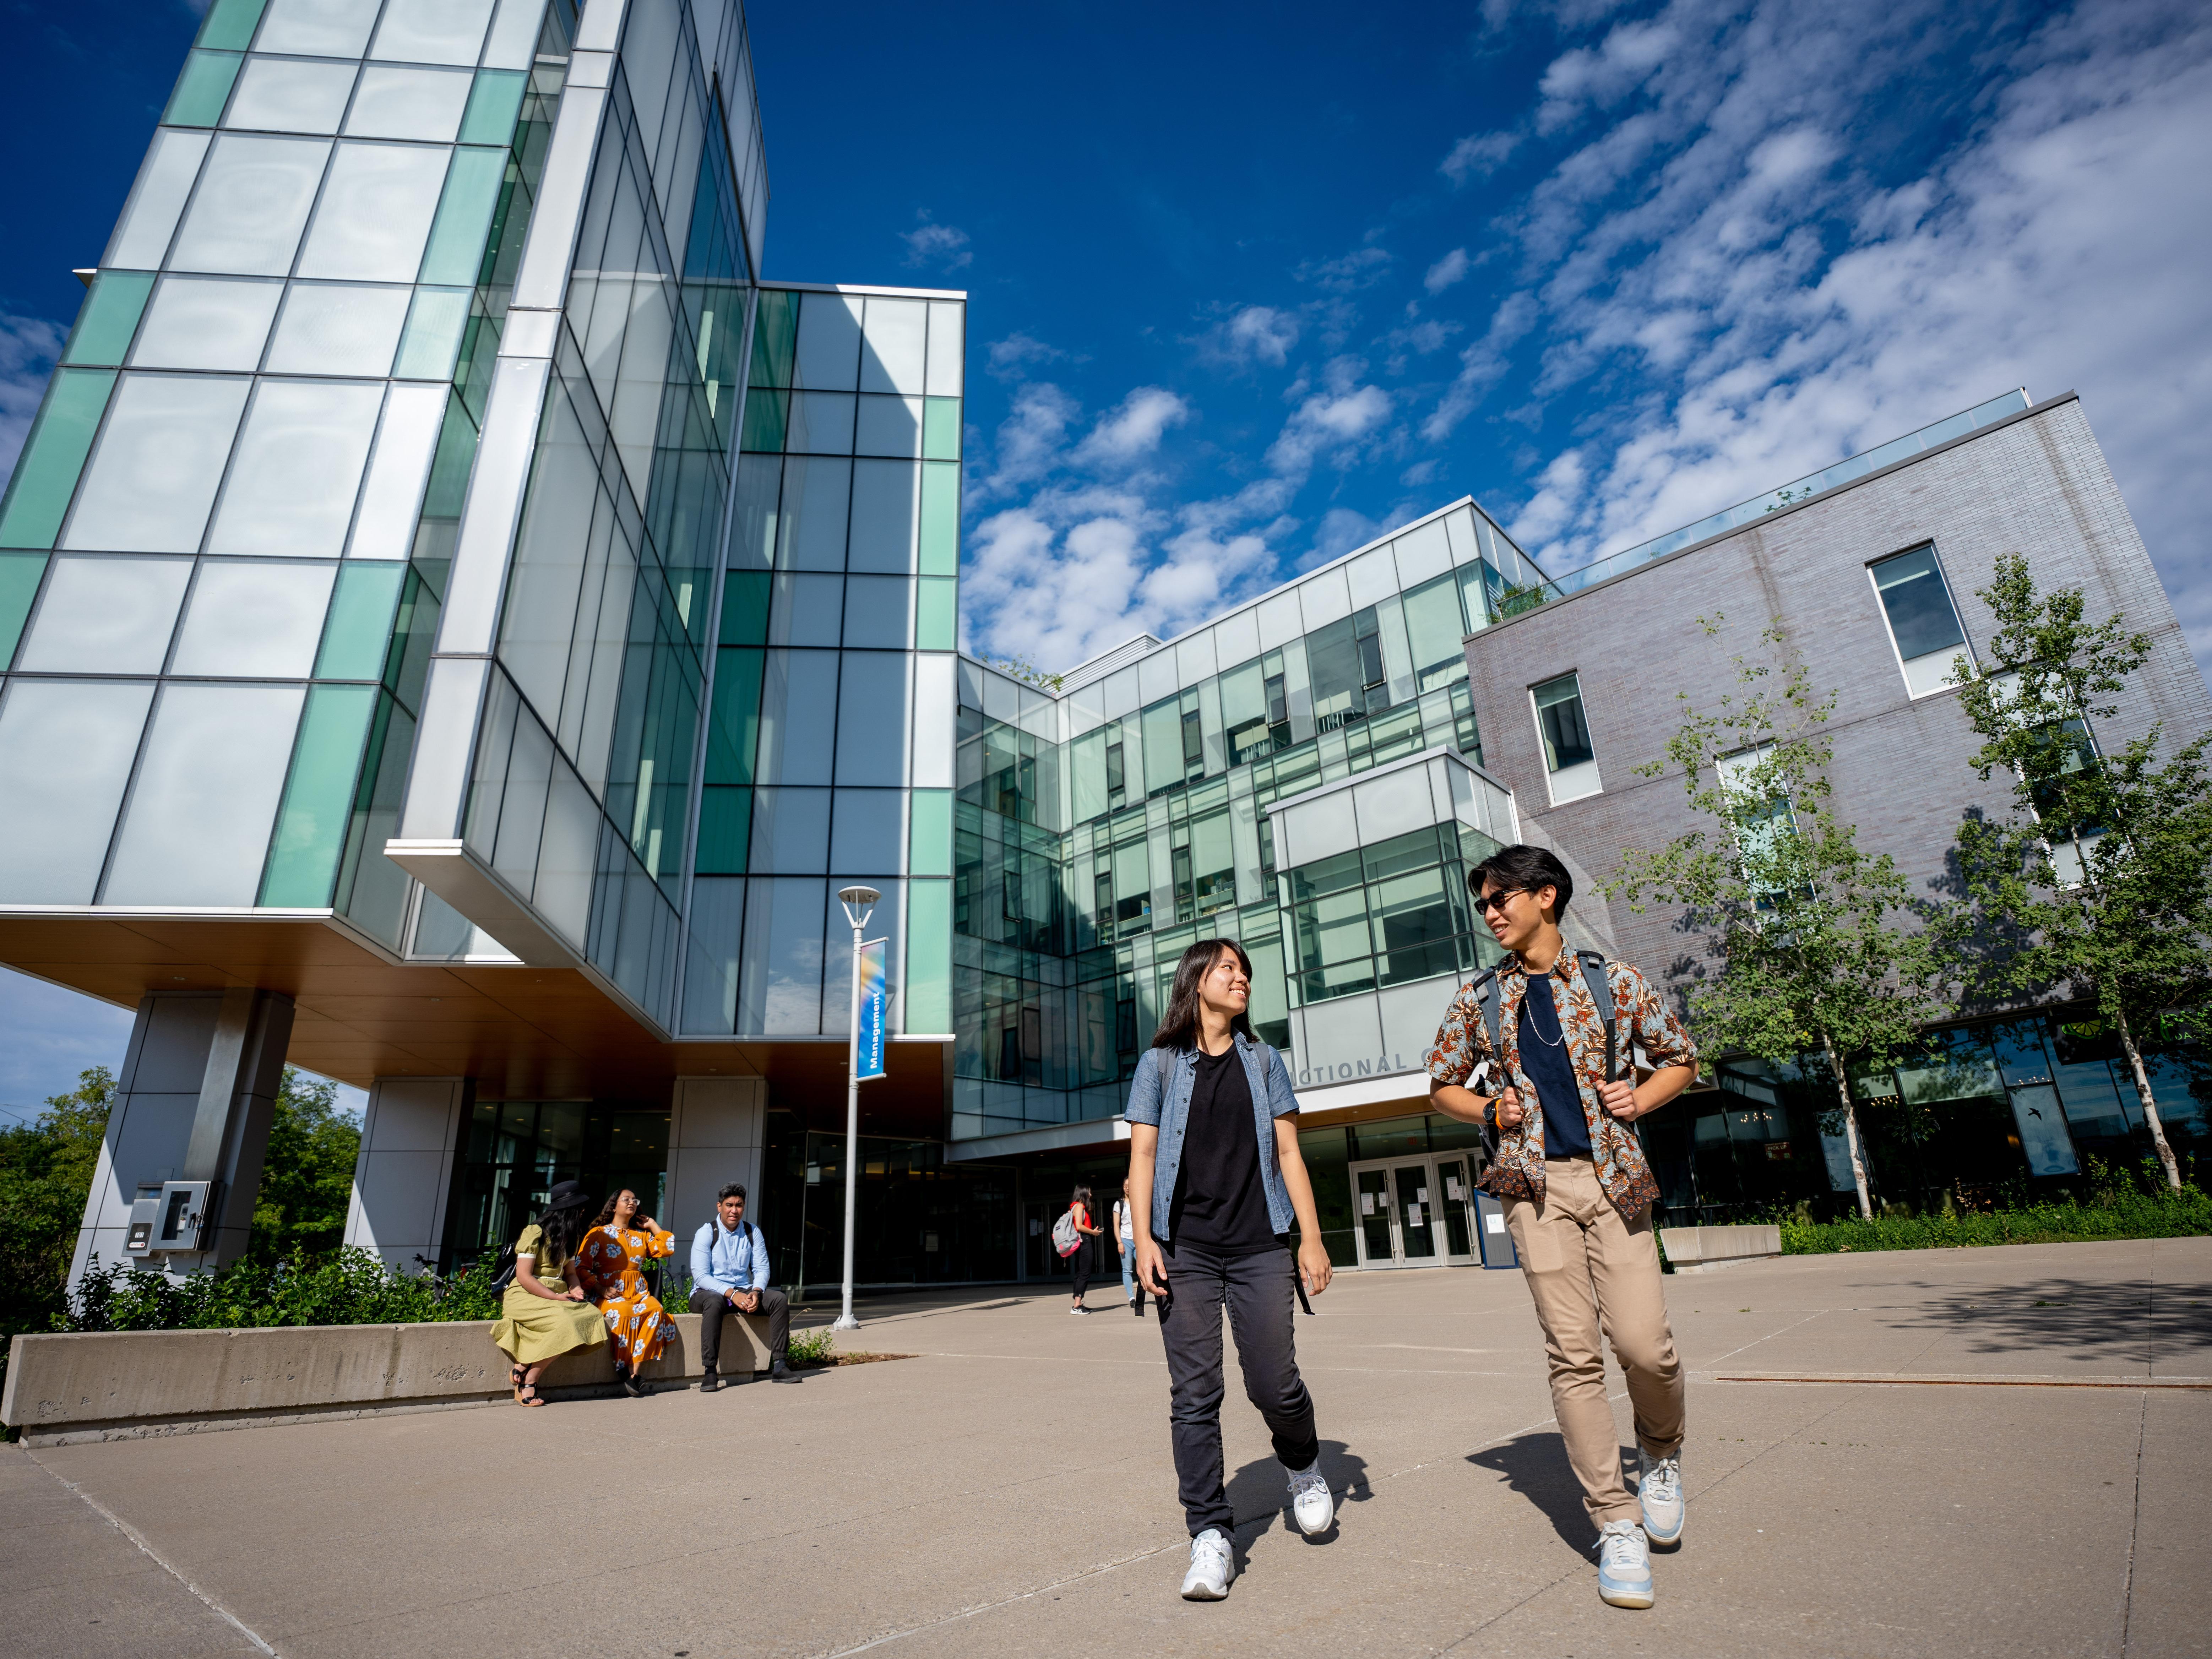 Students walking outside the Instructional Centre, in summer clothing.